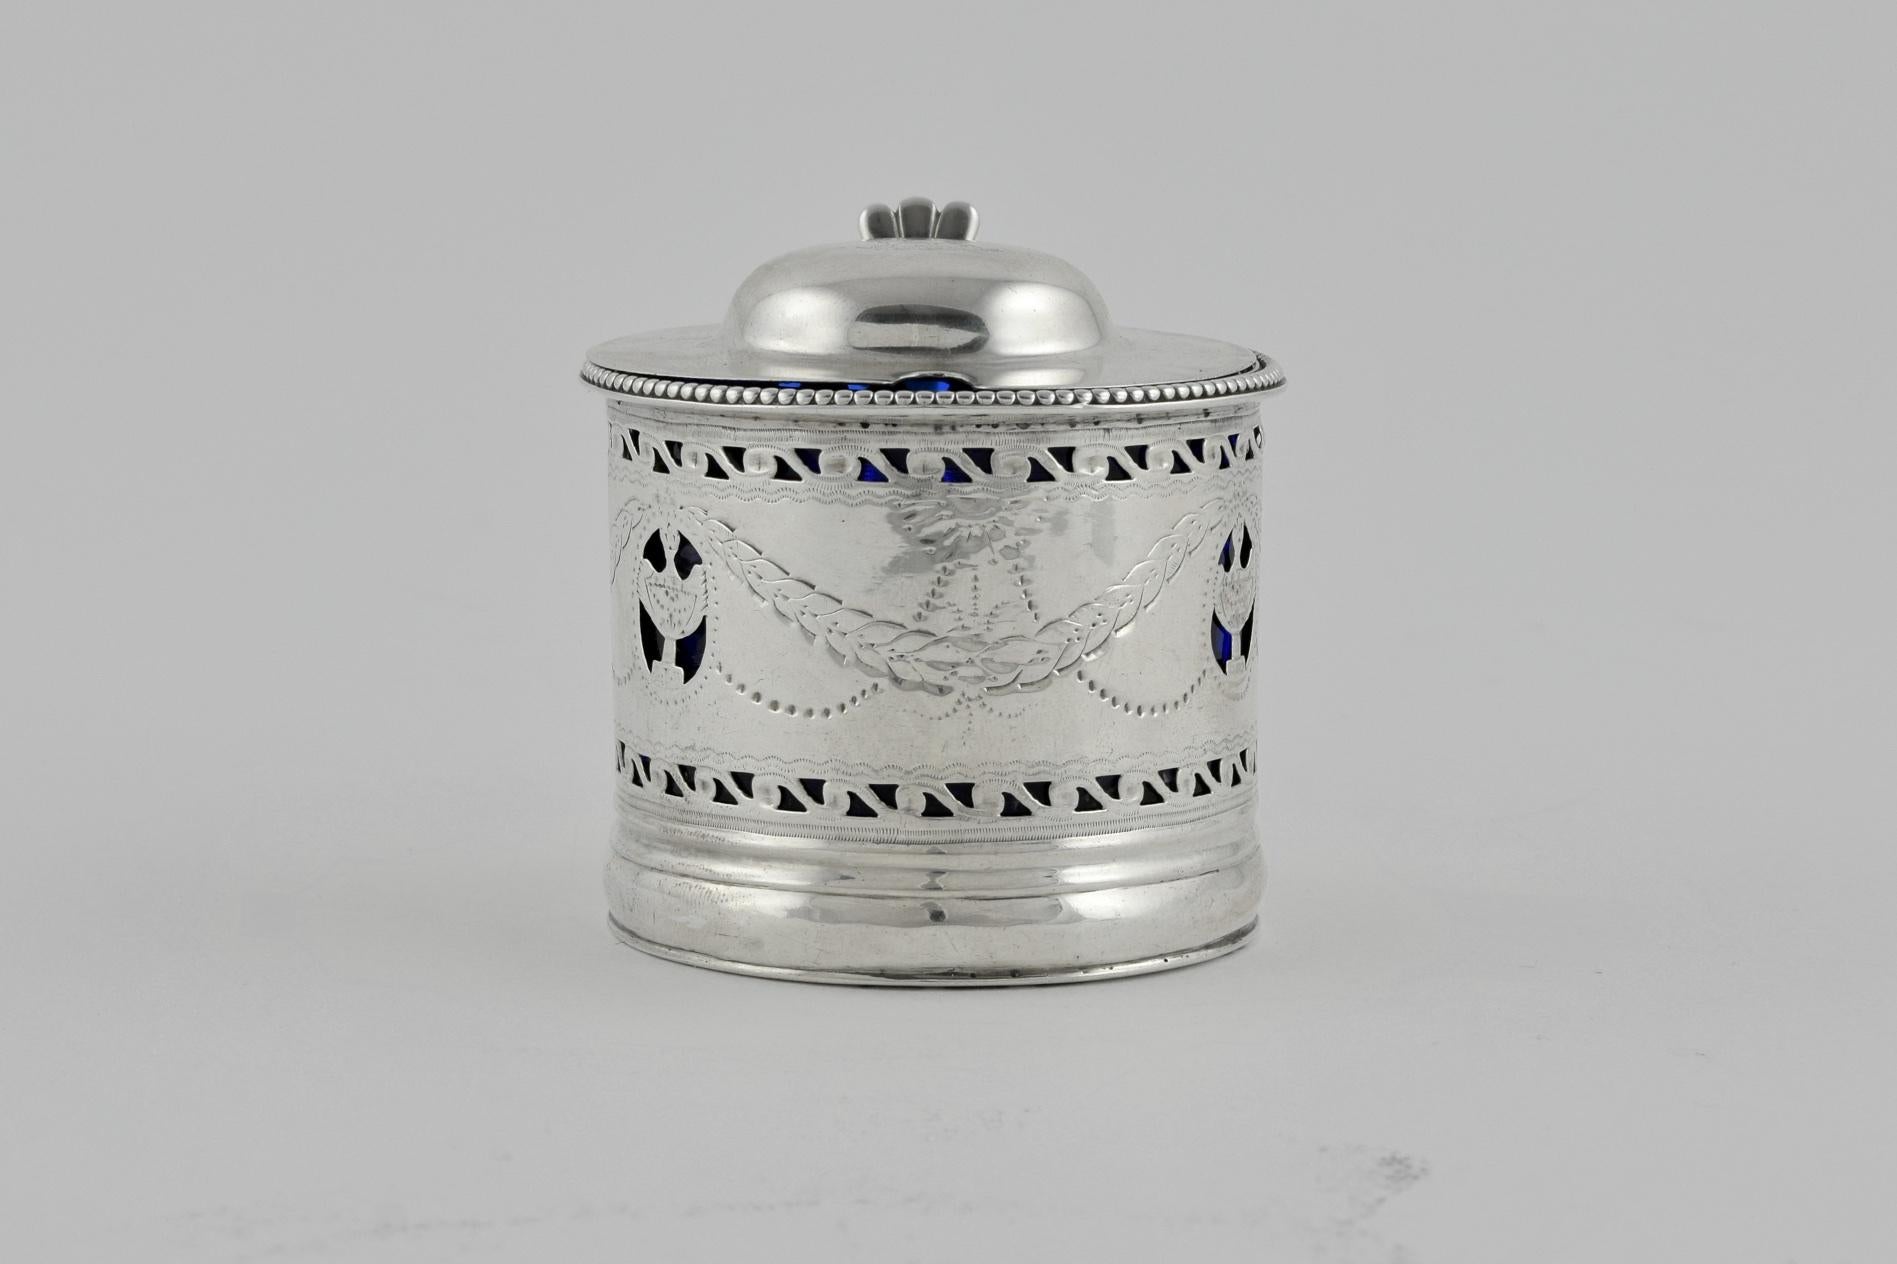 This charming little mustard pot was made in Dublin 1800. The mustard pot is decorated with engraved swags and a pierced silver body, allowing the unique blue glass interior to show through. On the domed lid, a lion crest is engraved. Clearly 